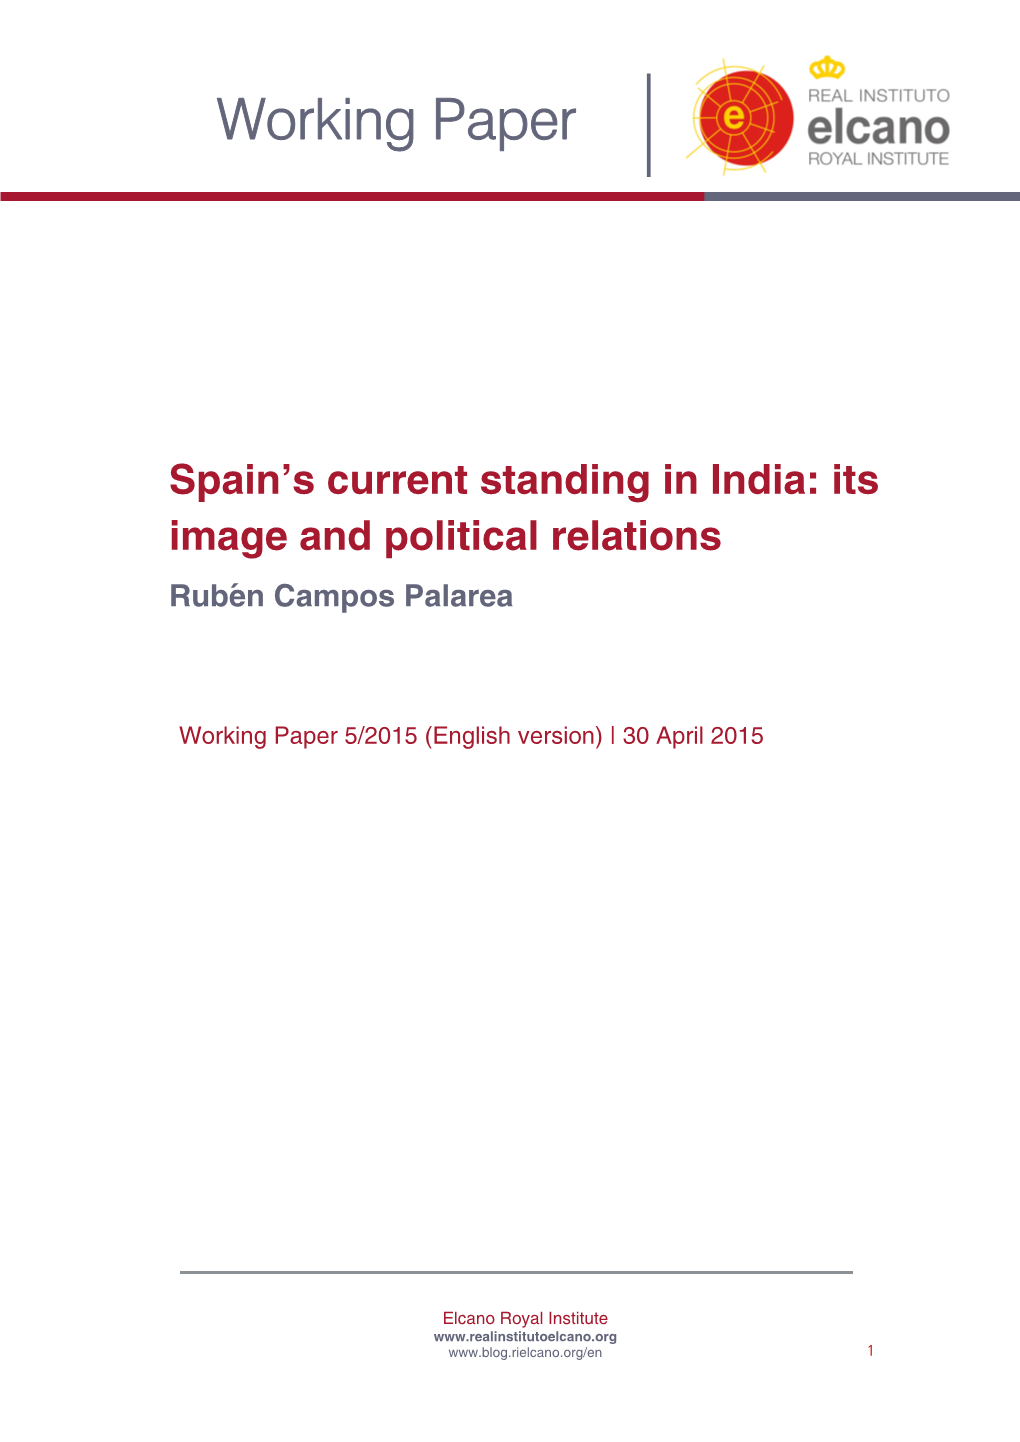 Spain's Current Standing in India: Its Image and Political Relations